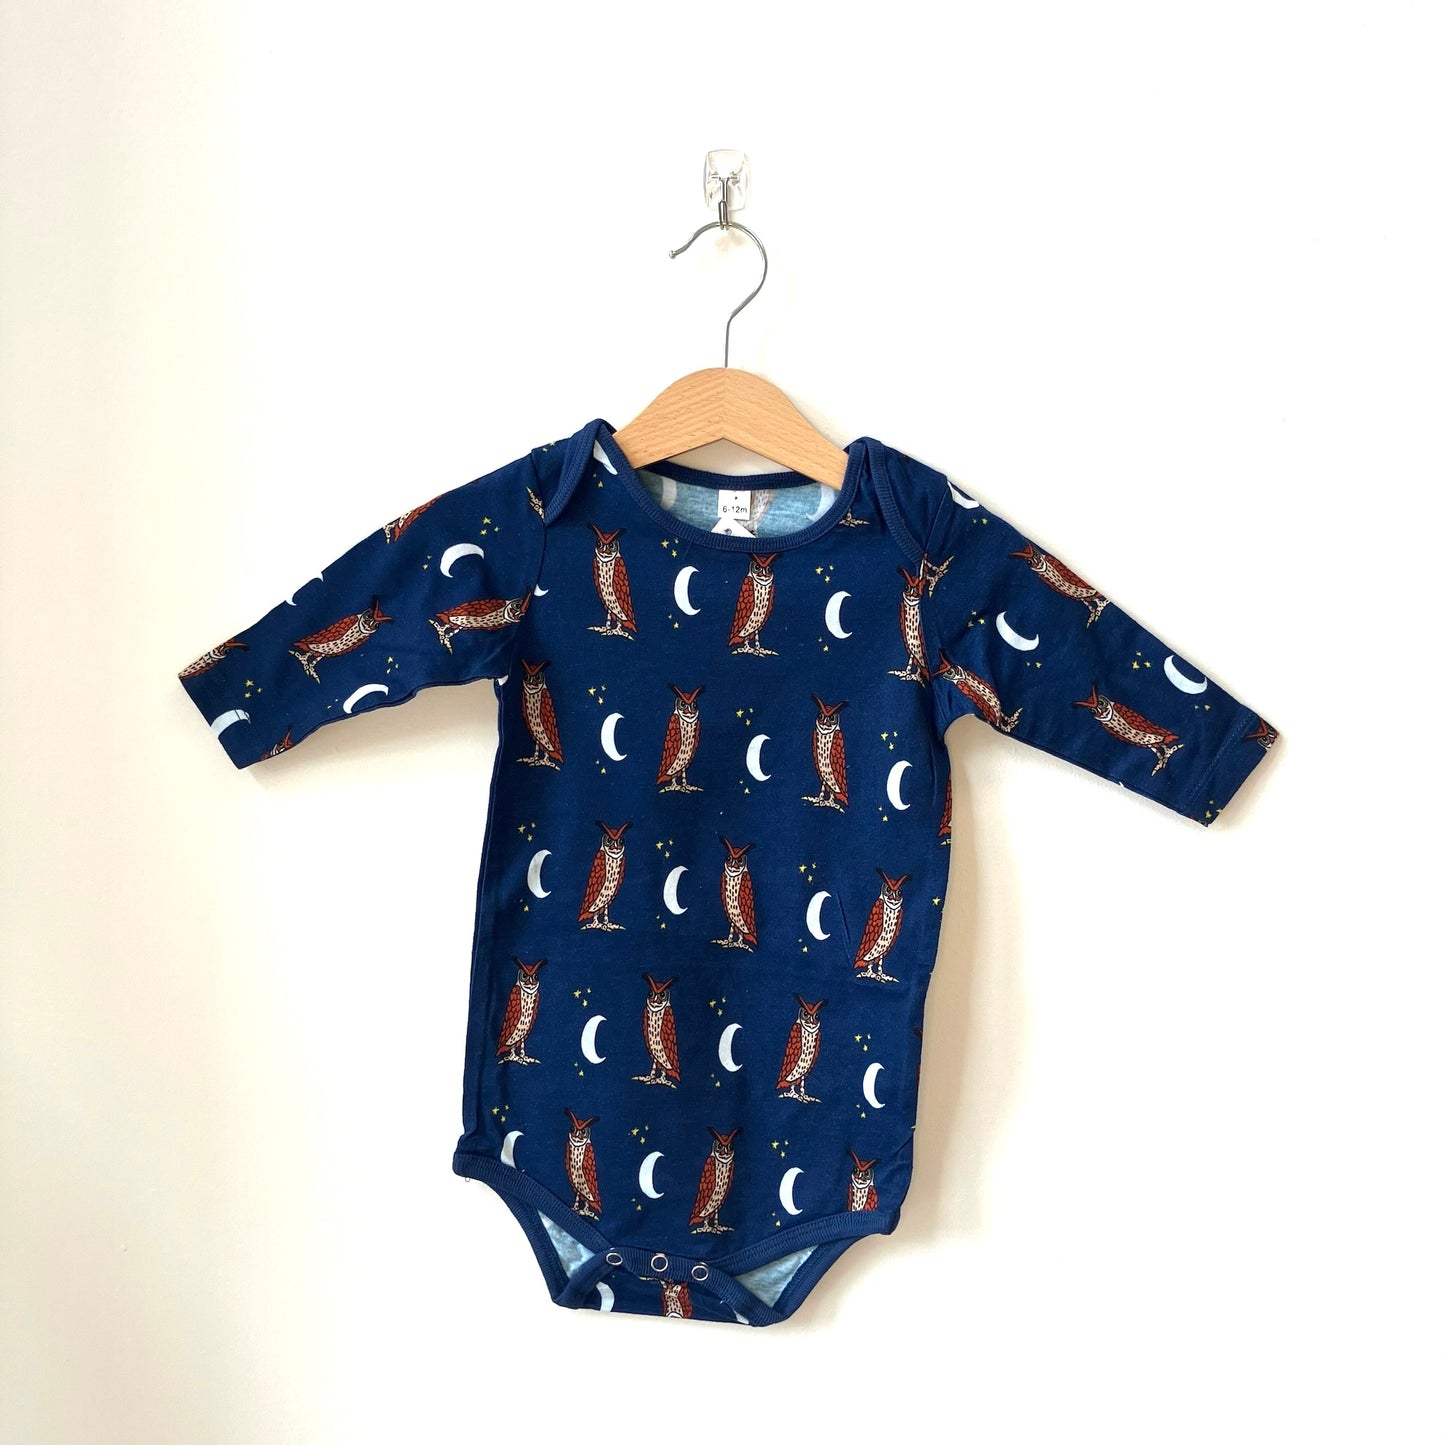 Baby Bodysuit - Owls and Moons